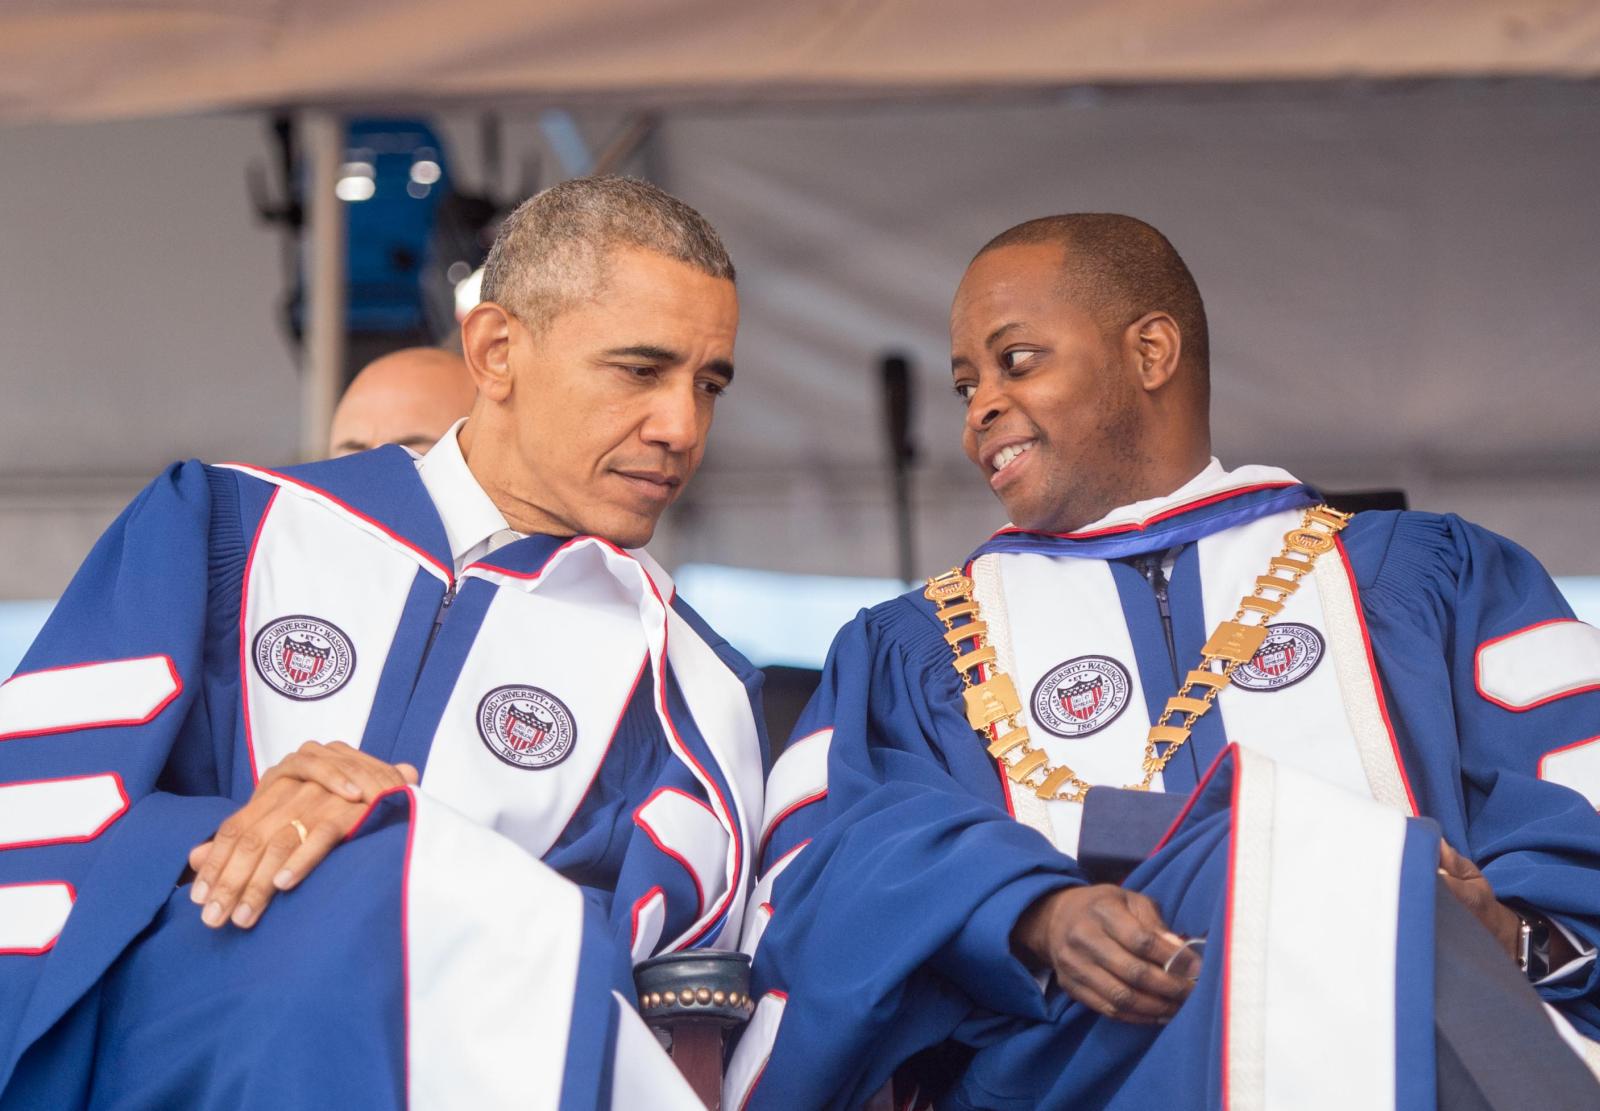 President Obama and Dr. Frederick